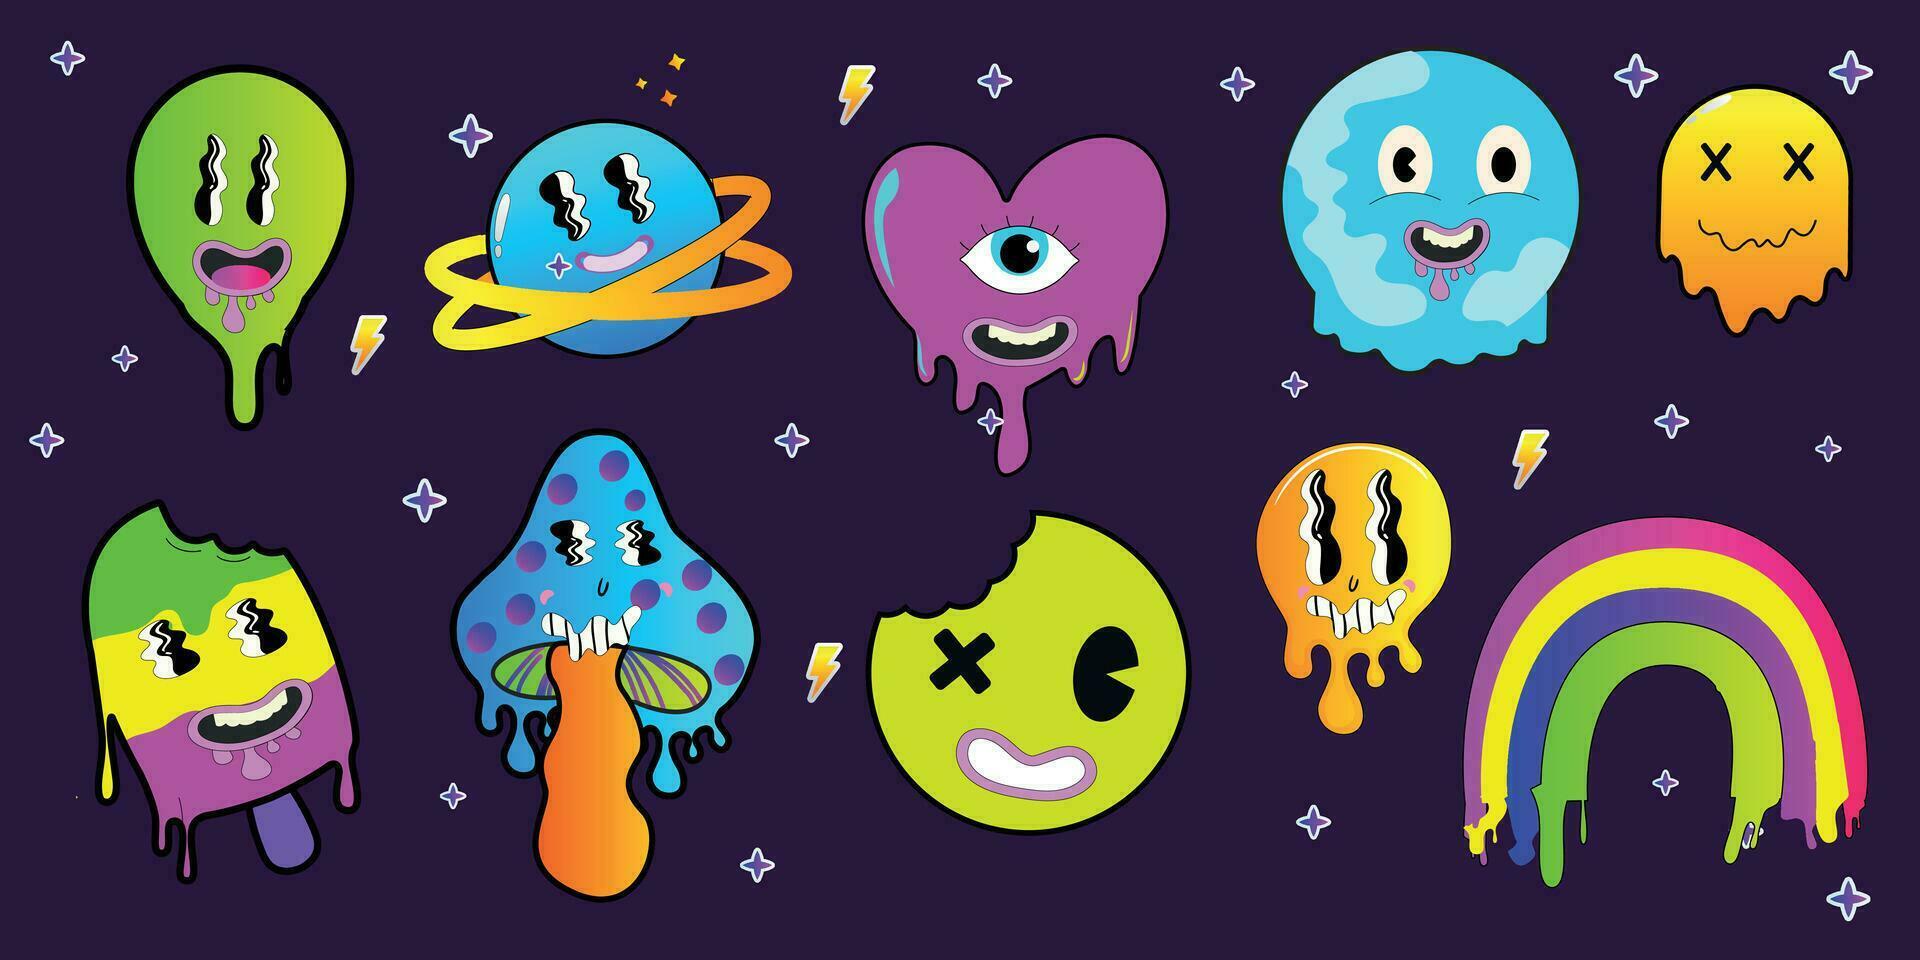 Psychedelic cartoon sticker set. Funny faces with distorted eyes and vibrant colors. Flowing texture. Crazy eyes. vector